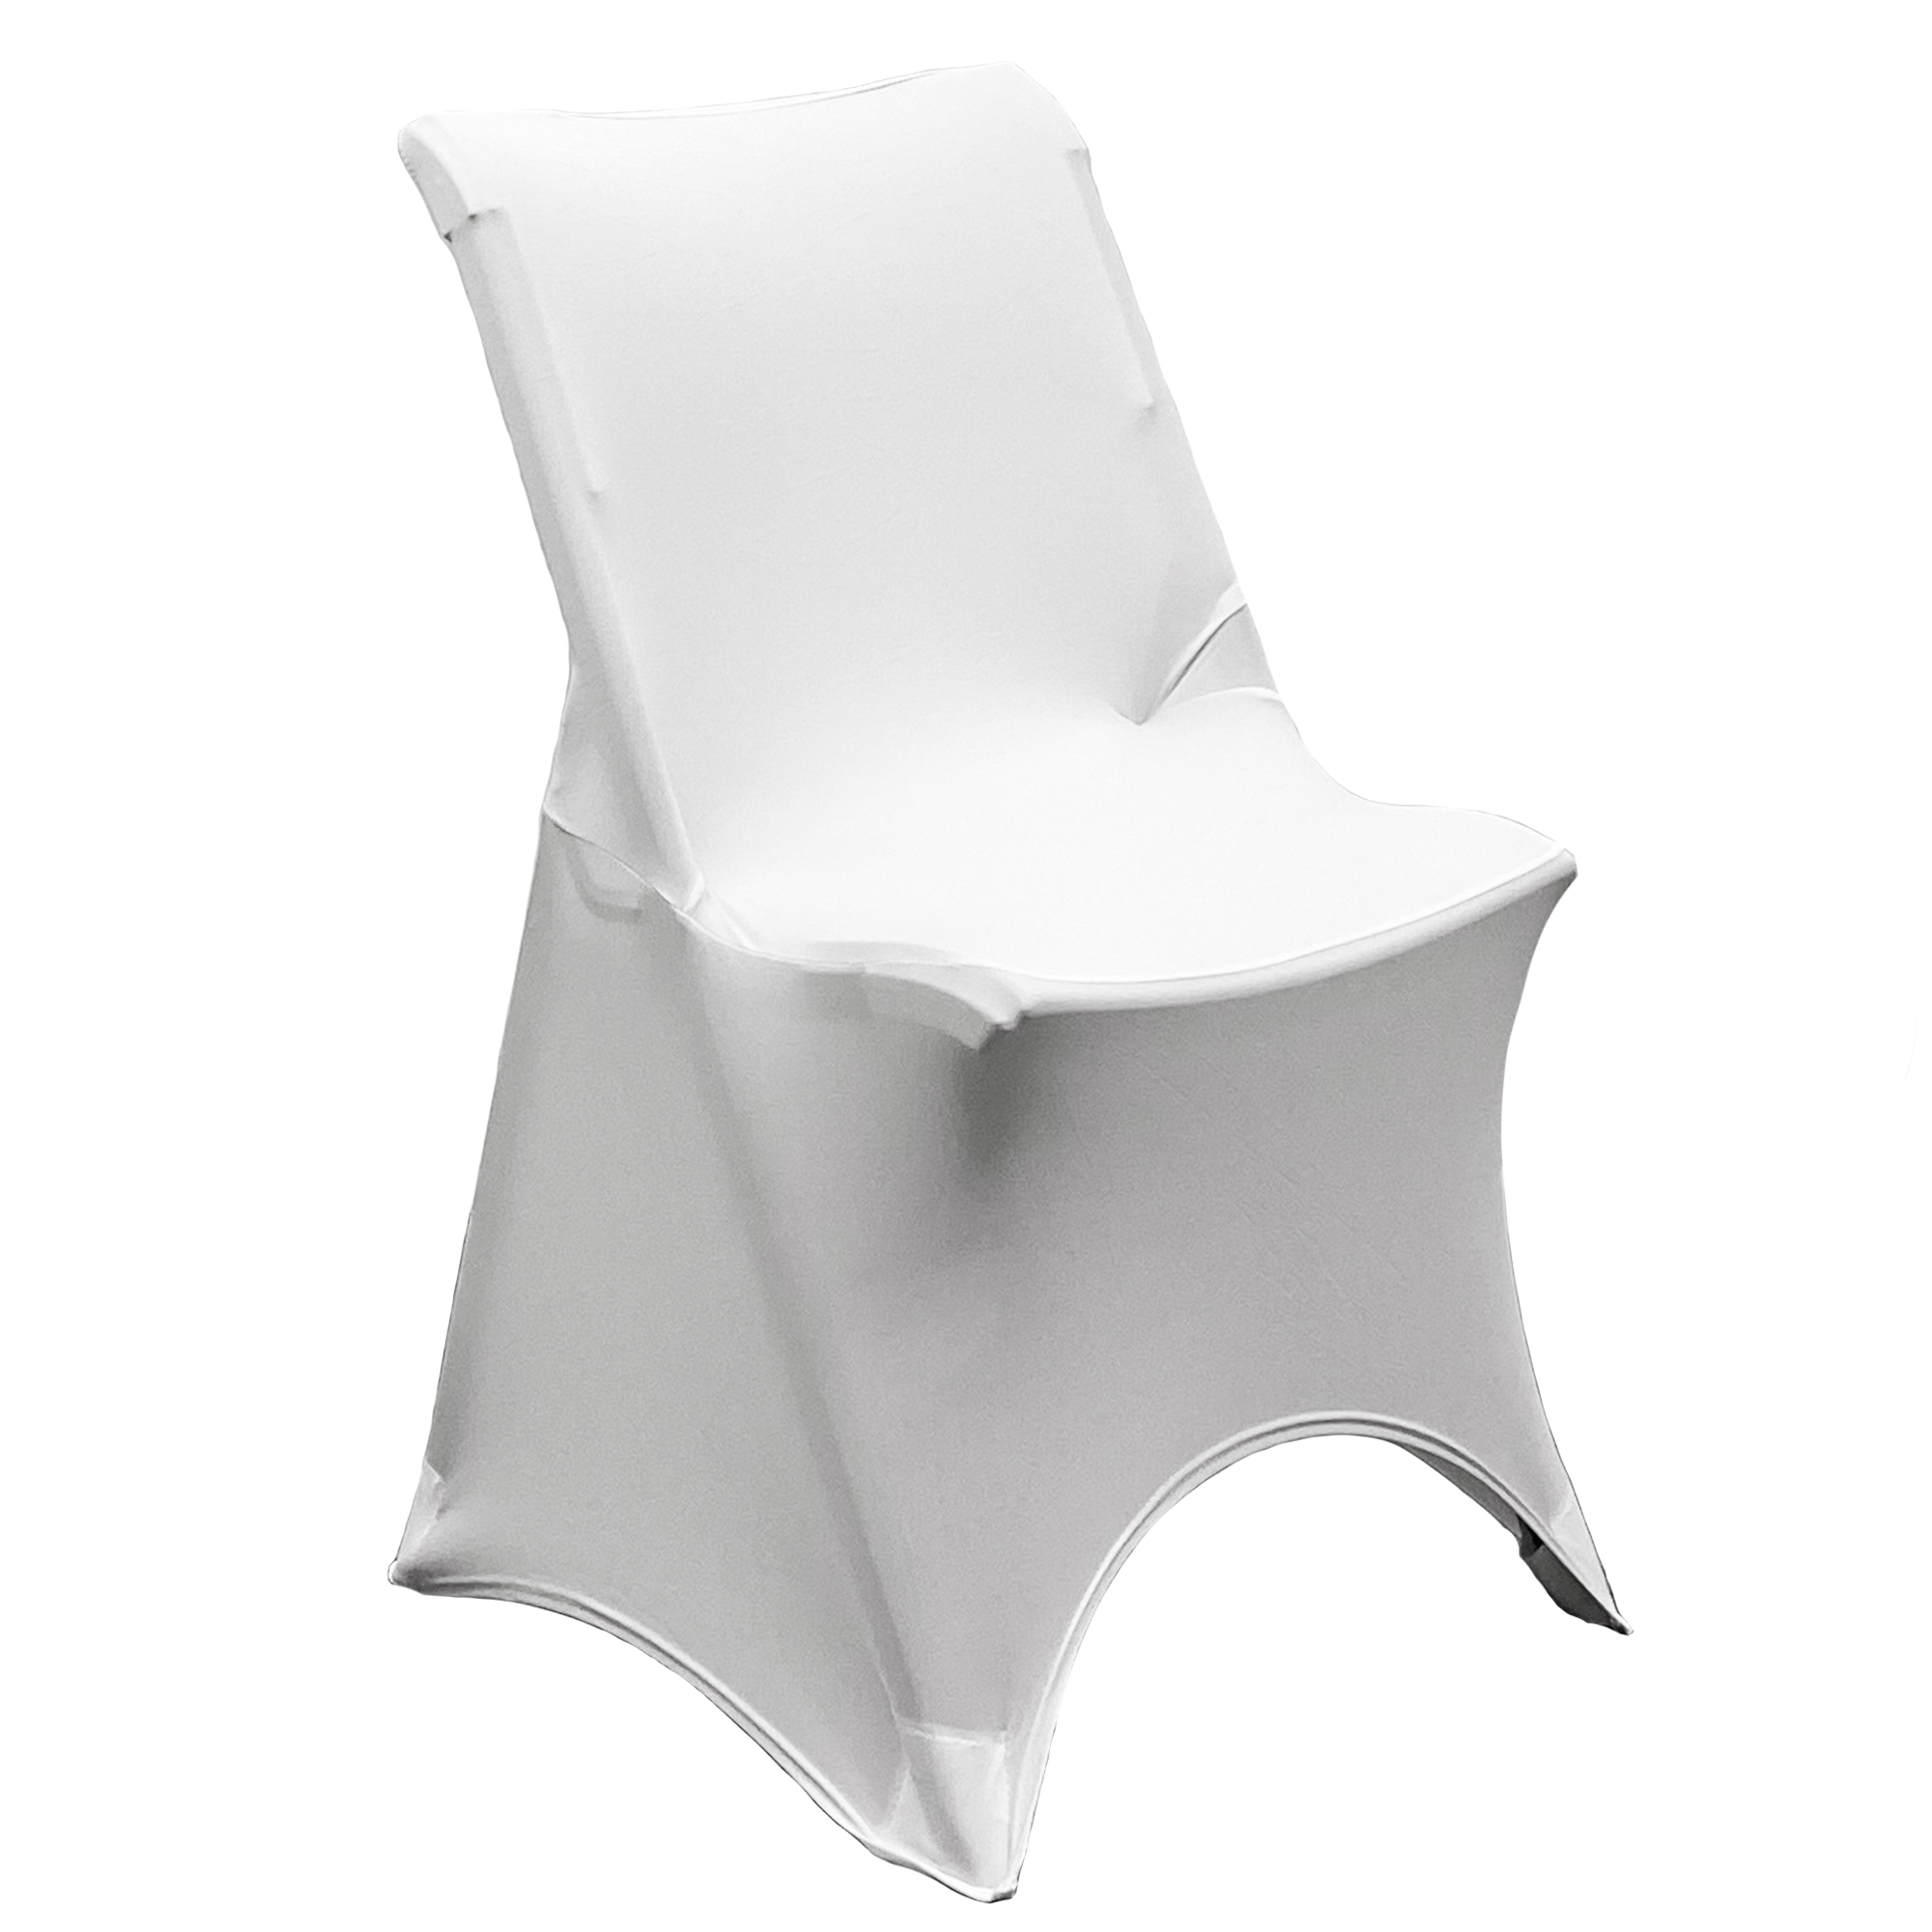 Stretch Spandex Folding Chair Cover White With Gold Marbling